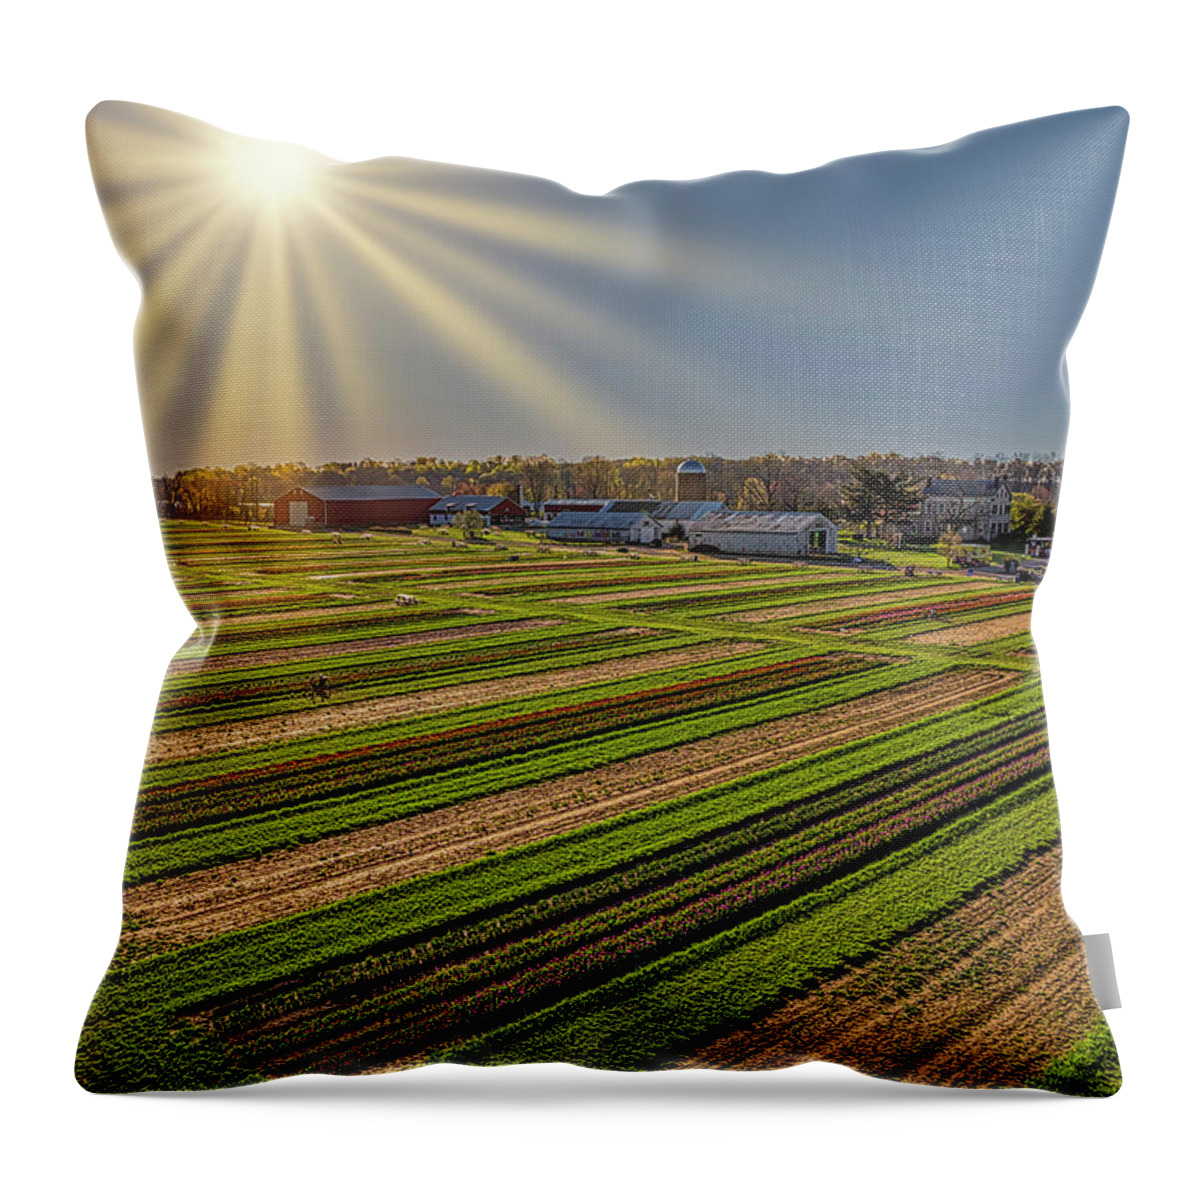 Tulip Throw Pillow featuring the photograph Aerial Tulip Farm by Susan Candelario